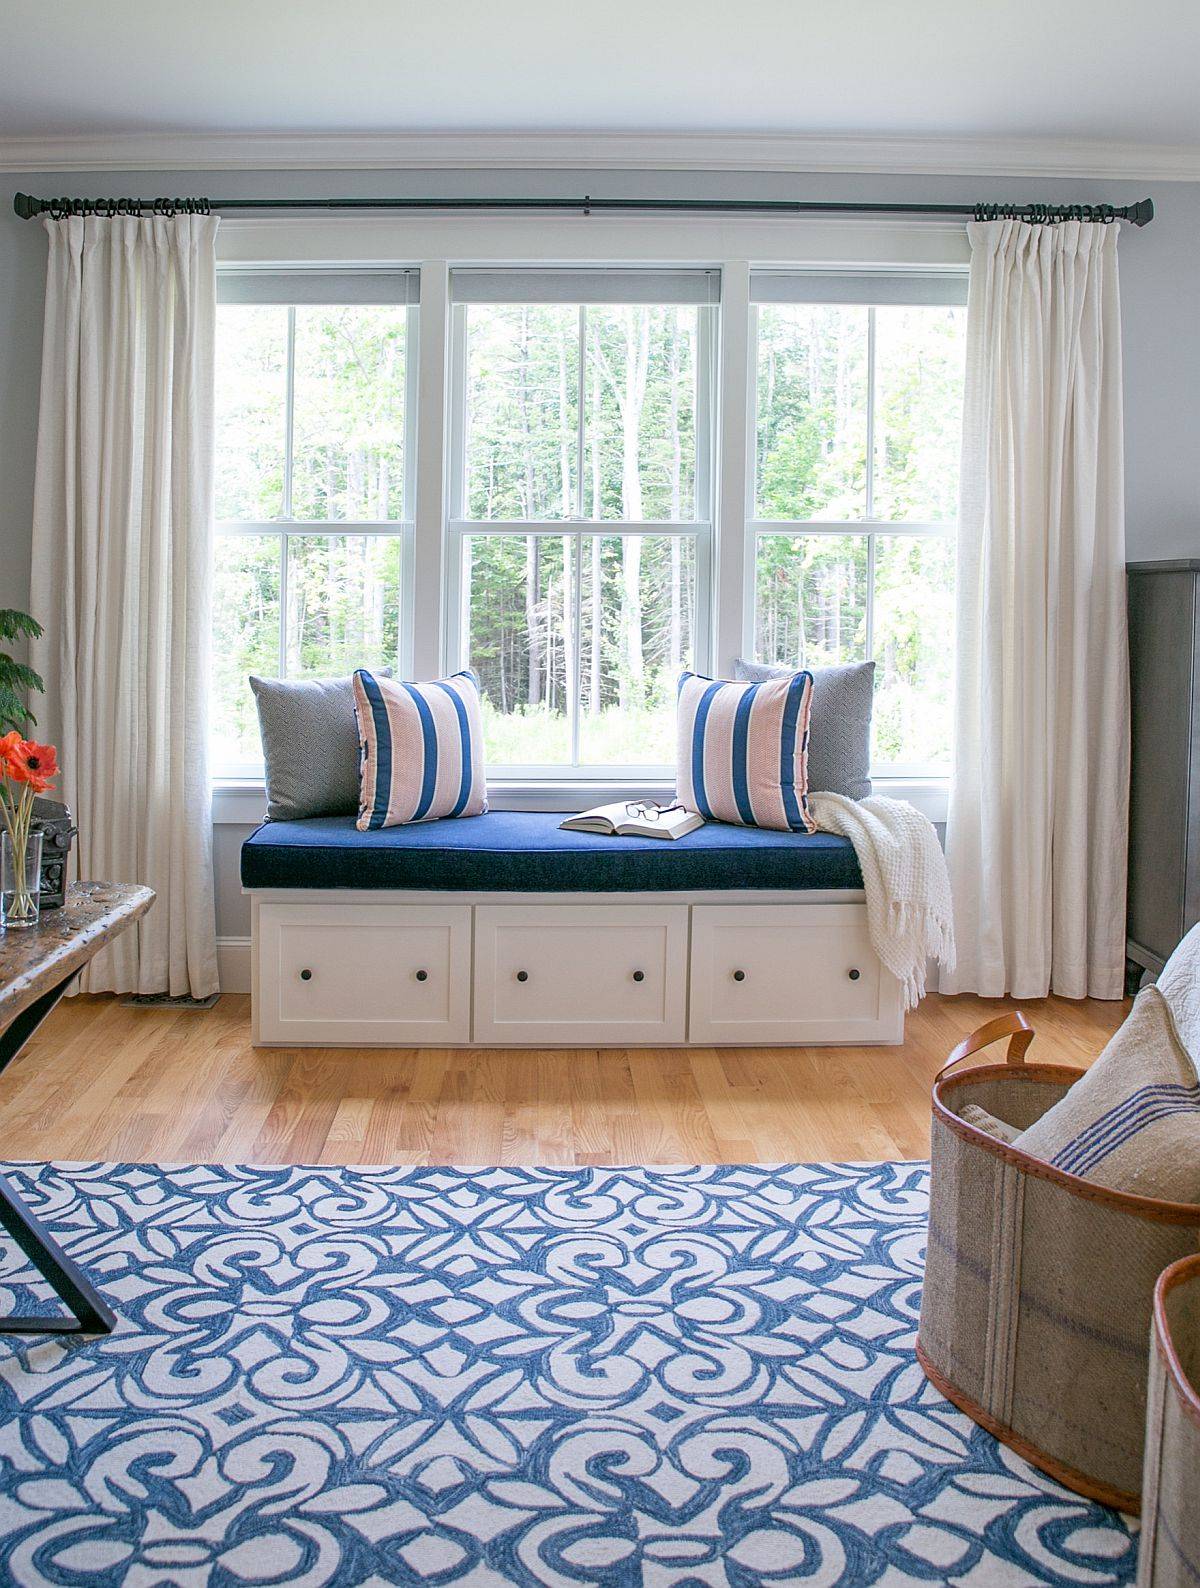 Your-custom-bedroom-window-seat-need-not-span-the-entire-length-of-the-window-every-time-82599